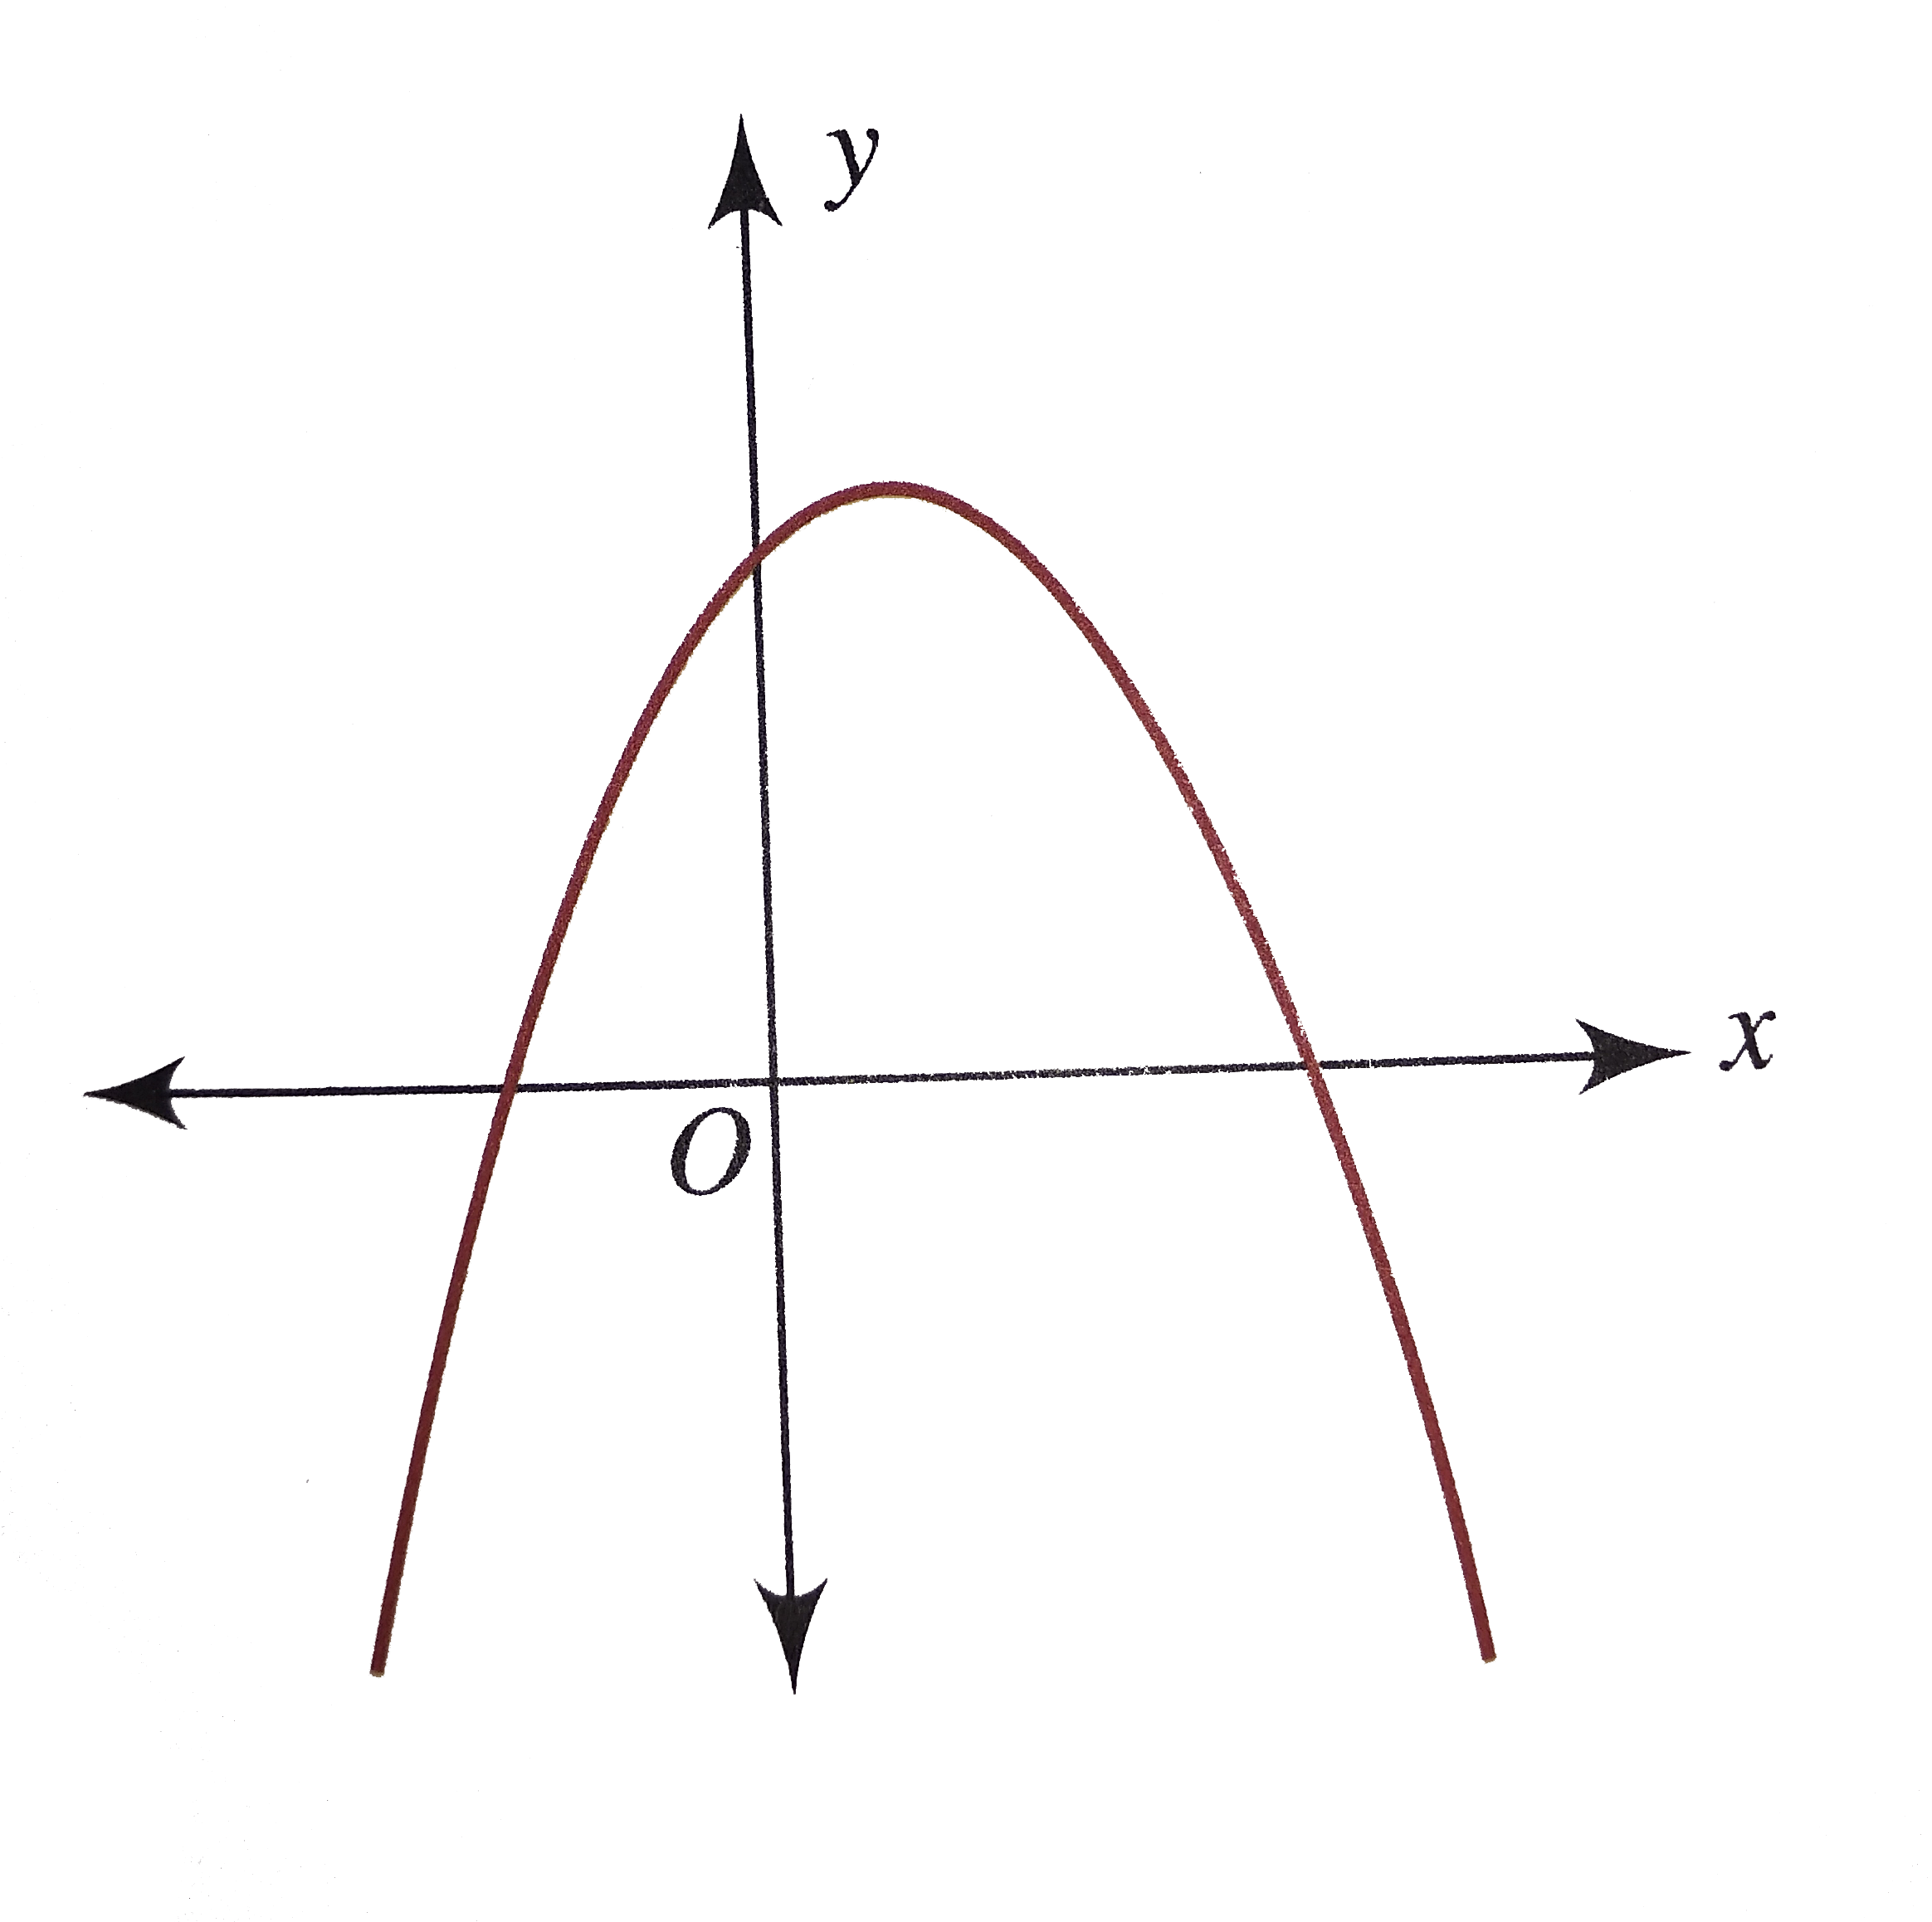 The following figure shows the graph of f(x)= ax^(2)+ bx+c, find the sign of a, b and c.